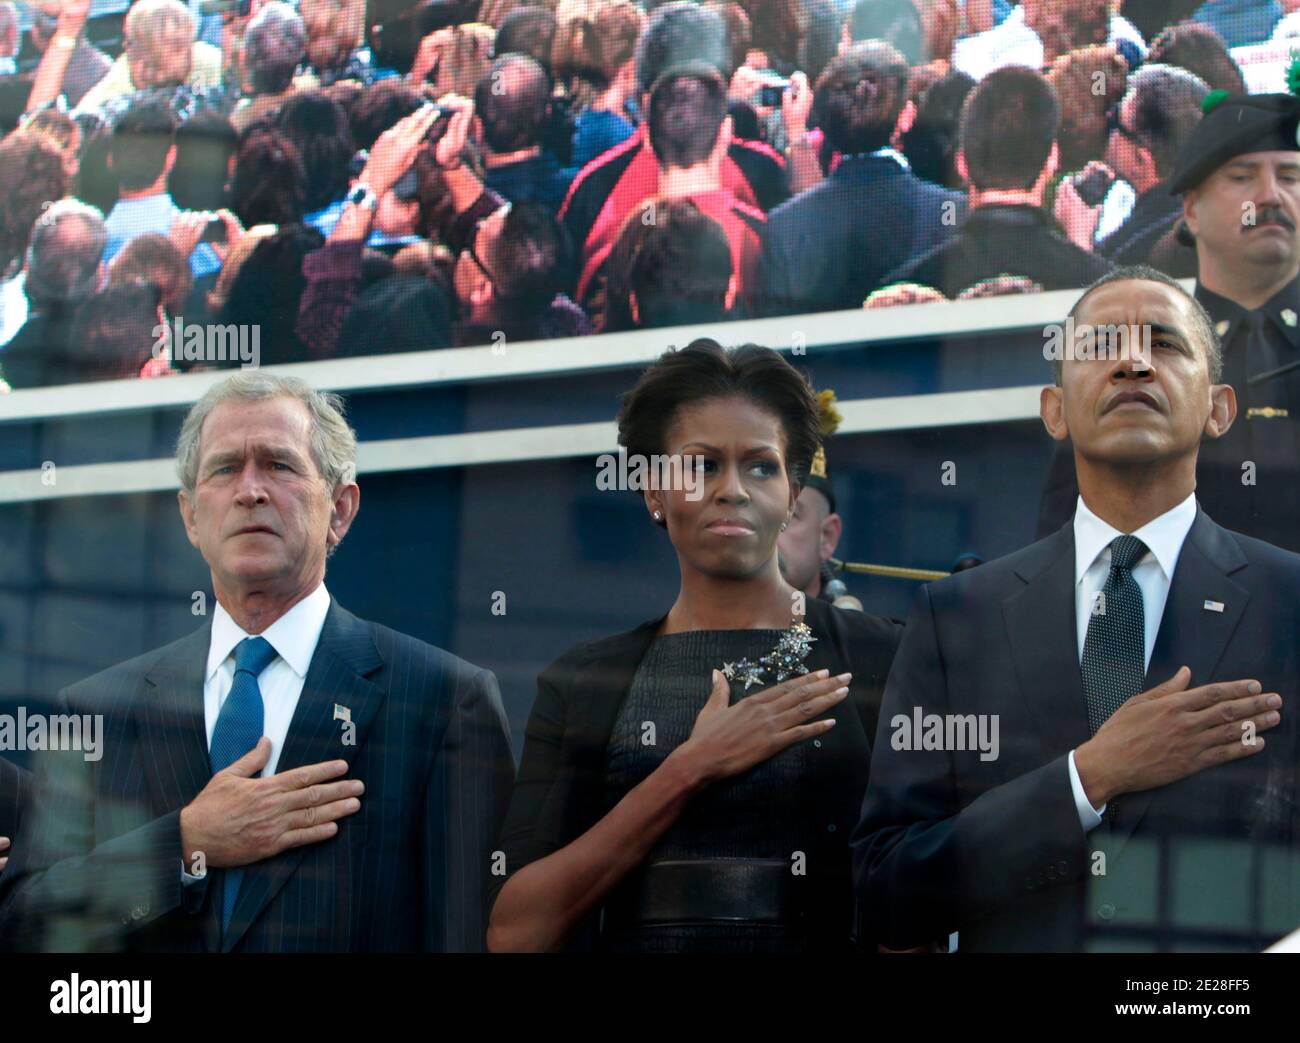 (left to right) Laura Bush, former president Geowge W. Bush; Michelle Obama and President Barack during tenth anniversary ceremonies at the site of the World Trade Center September 11, 2011, in New York. POOL/Noah K. Murray/The Star-Ledger Photo pool/ABACAPRESS.COM Stock Photo